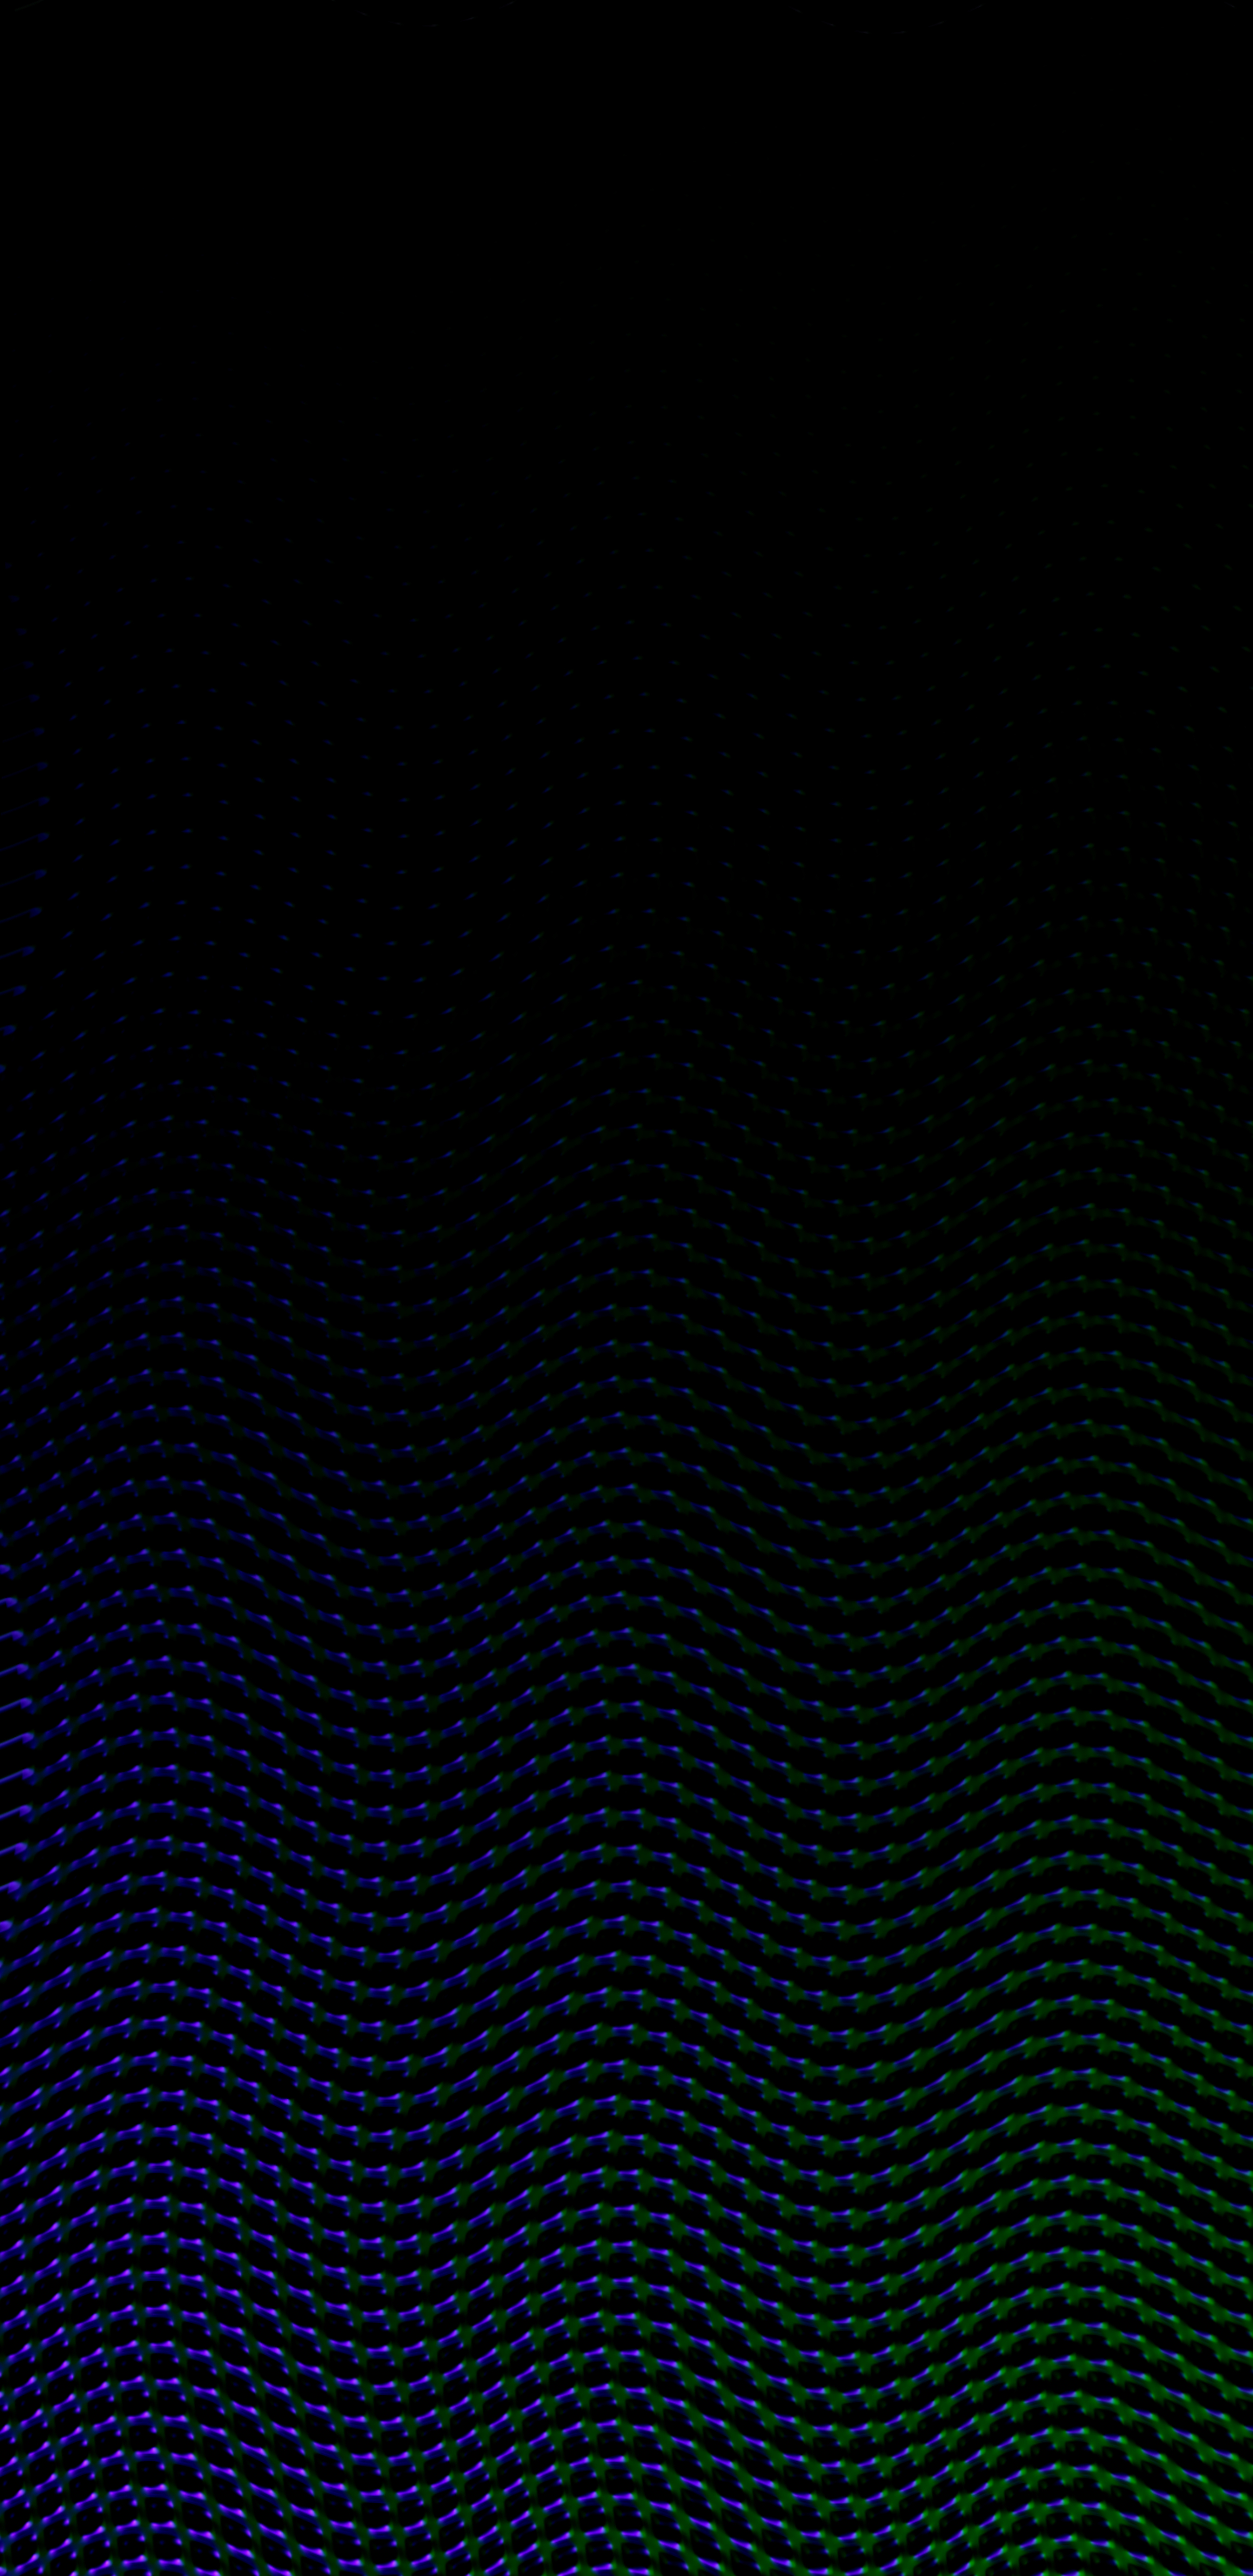 wavy, textures, dark, pattern, texture, relief cell phone wallpapers